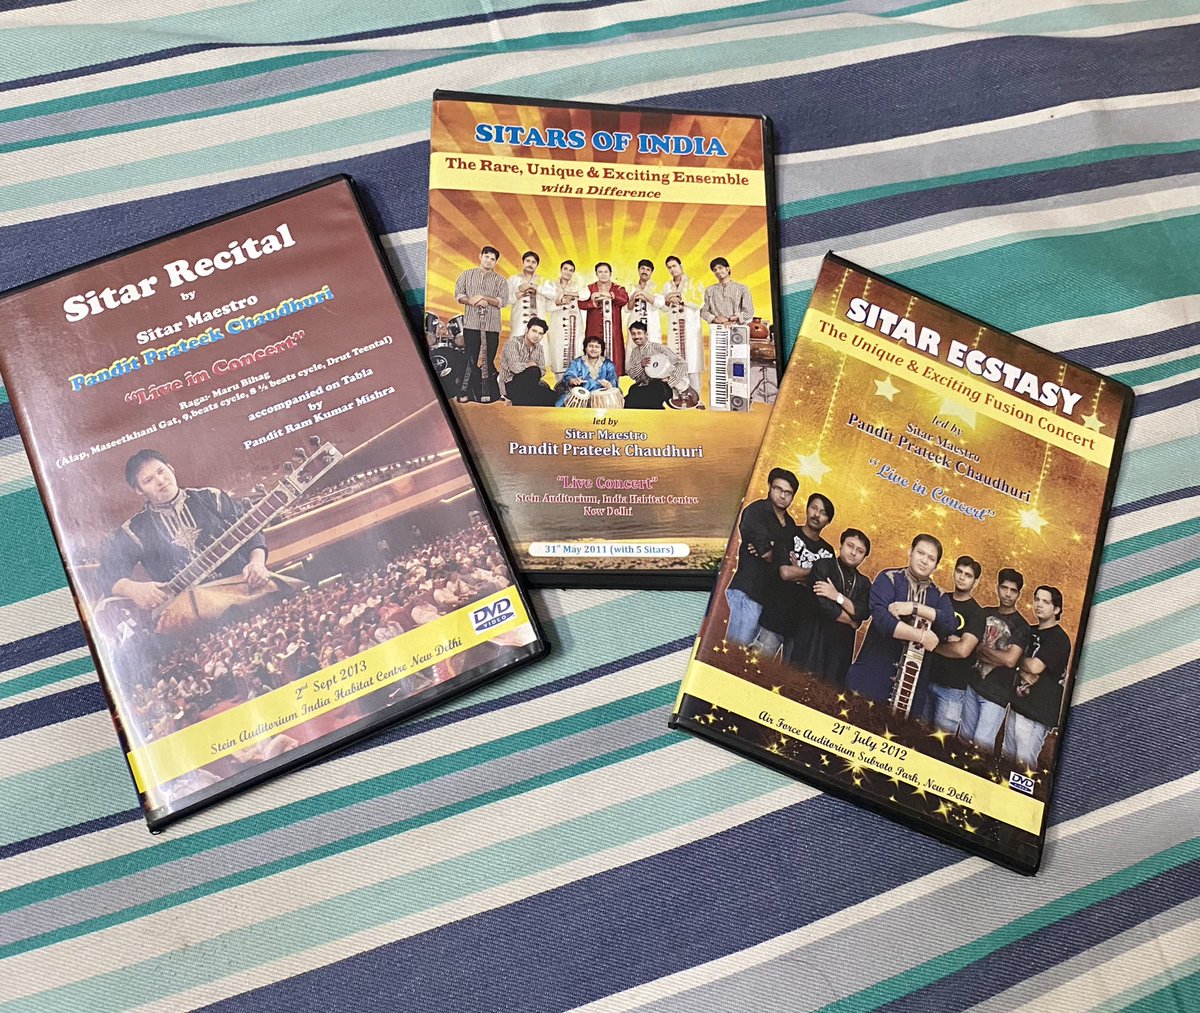 Found these dvds while searching books today. These were given to my father by 38 yr old sitar maestro Pandit Prateek Chaudhurison of maestro pandit debu chaudhuri. Both lost battle to covid… #covid19 #talentlost #sitarmaestro